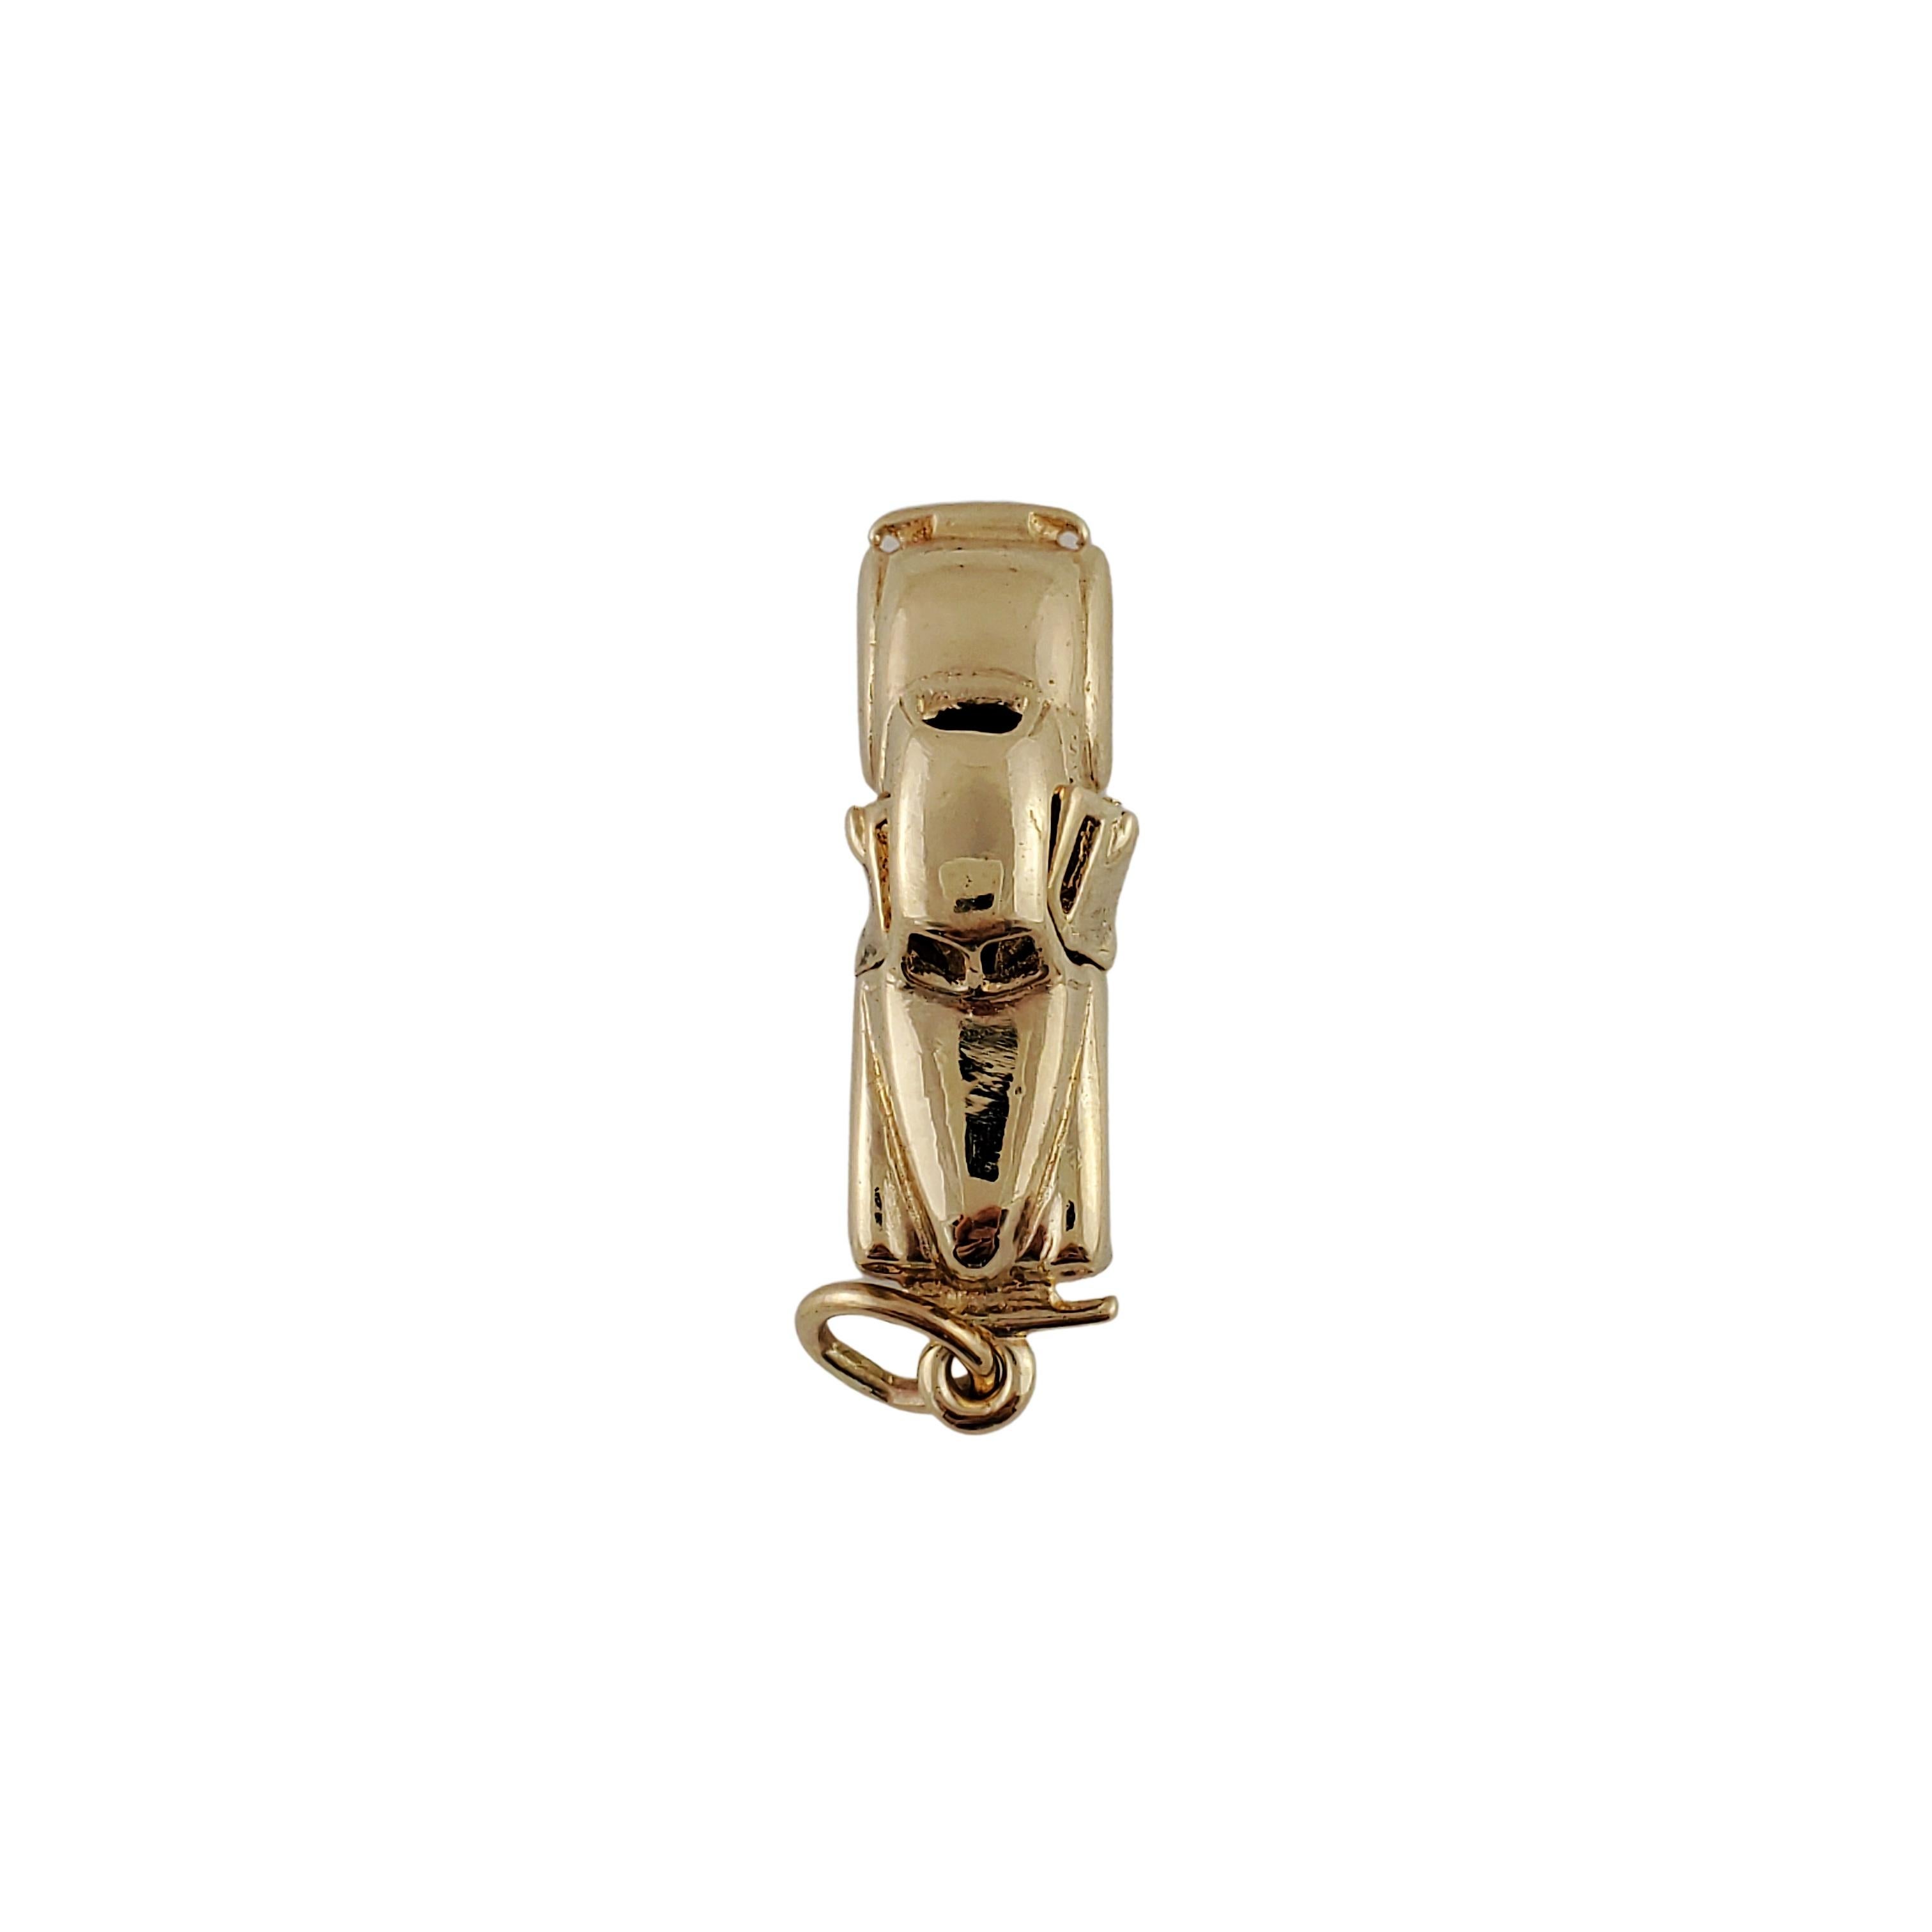 Vintage 14K Yellow Gold Car Charm

Breathtaking 14K Yellow Gold Car charm with moving front wheels and functional left door.  

Size: 27.32mm X 7.5mm

Weight: 4.8 gr / 3.0 dwt

Very good condition, professionally polished.

Will come packaged in a